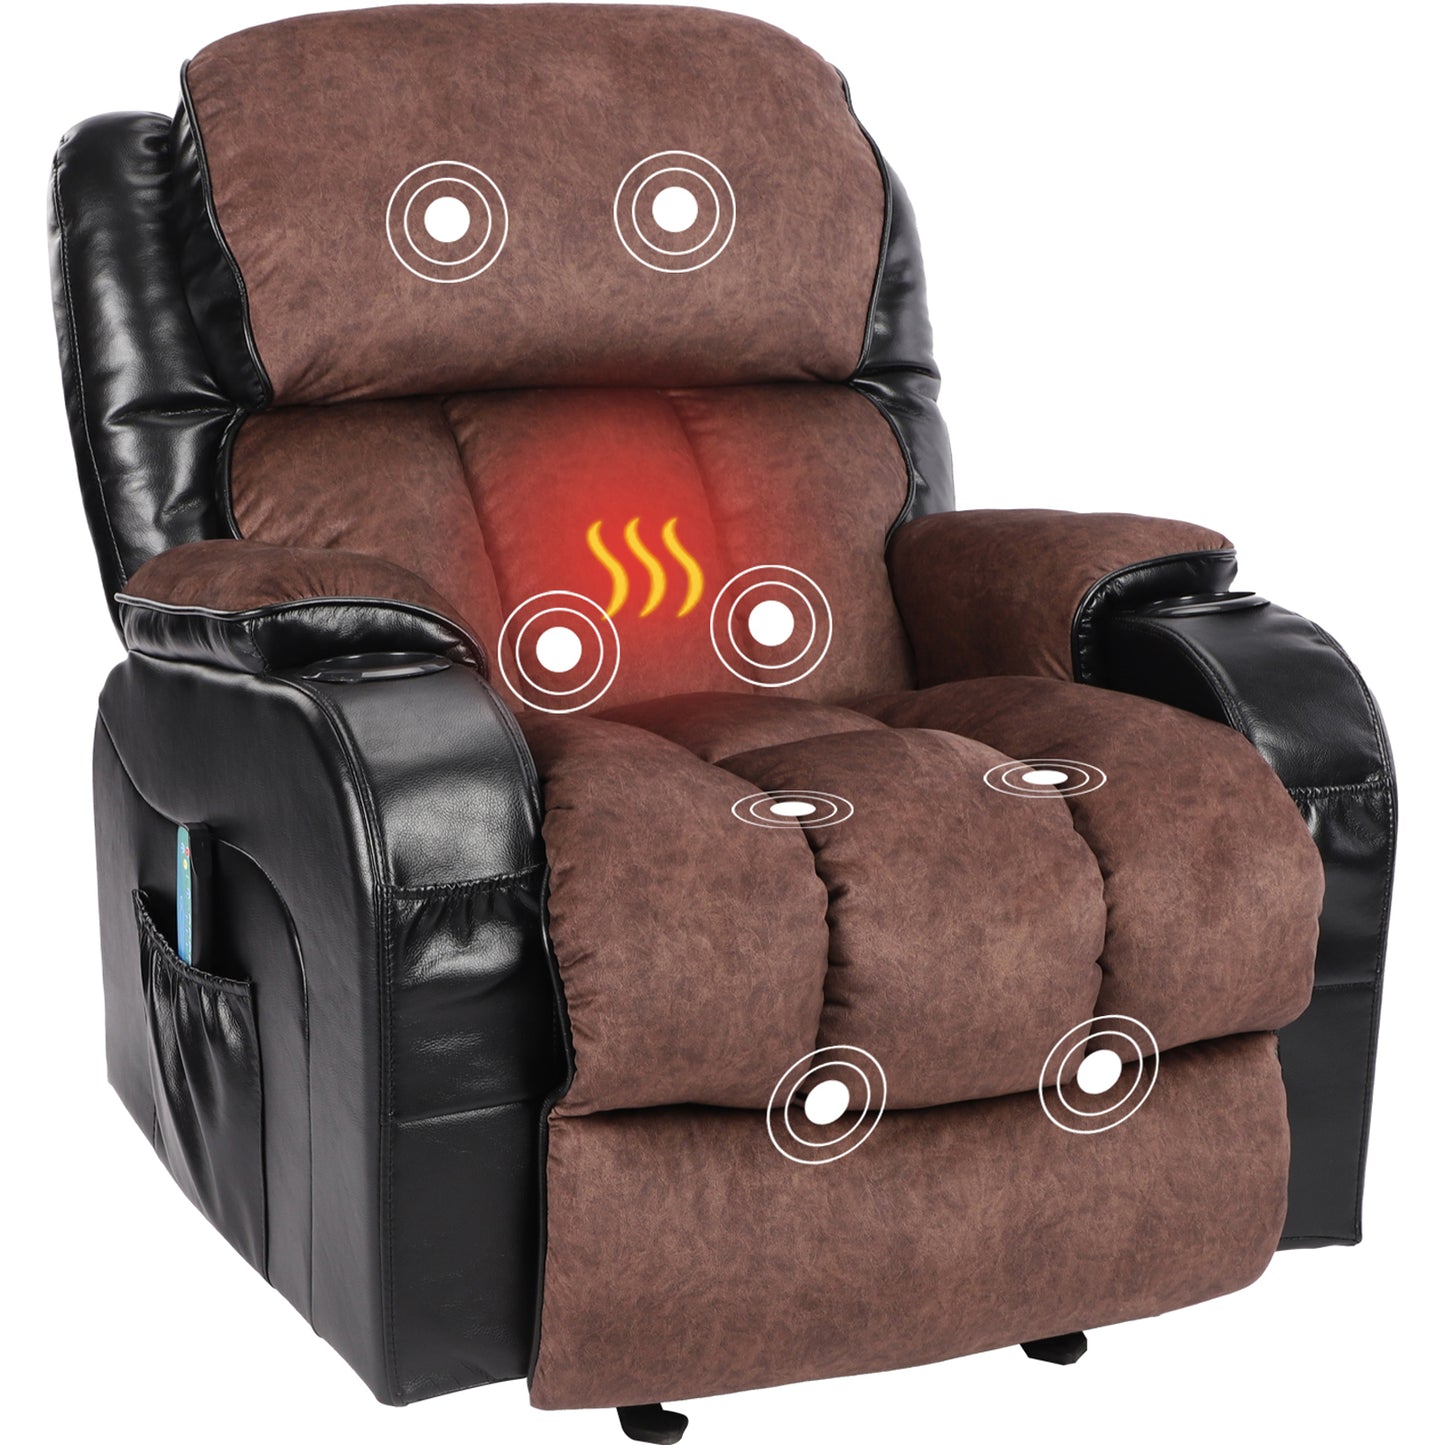 Recliner Chair for Living Room, Ergonomic Recliner Manual Recliner Chair with Cup Holders, USB, Heavy Duty Reclining Mechanism Elderly Single Recliner Rocker Sofa for Bedroom Home Theater, Brown